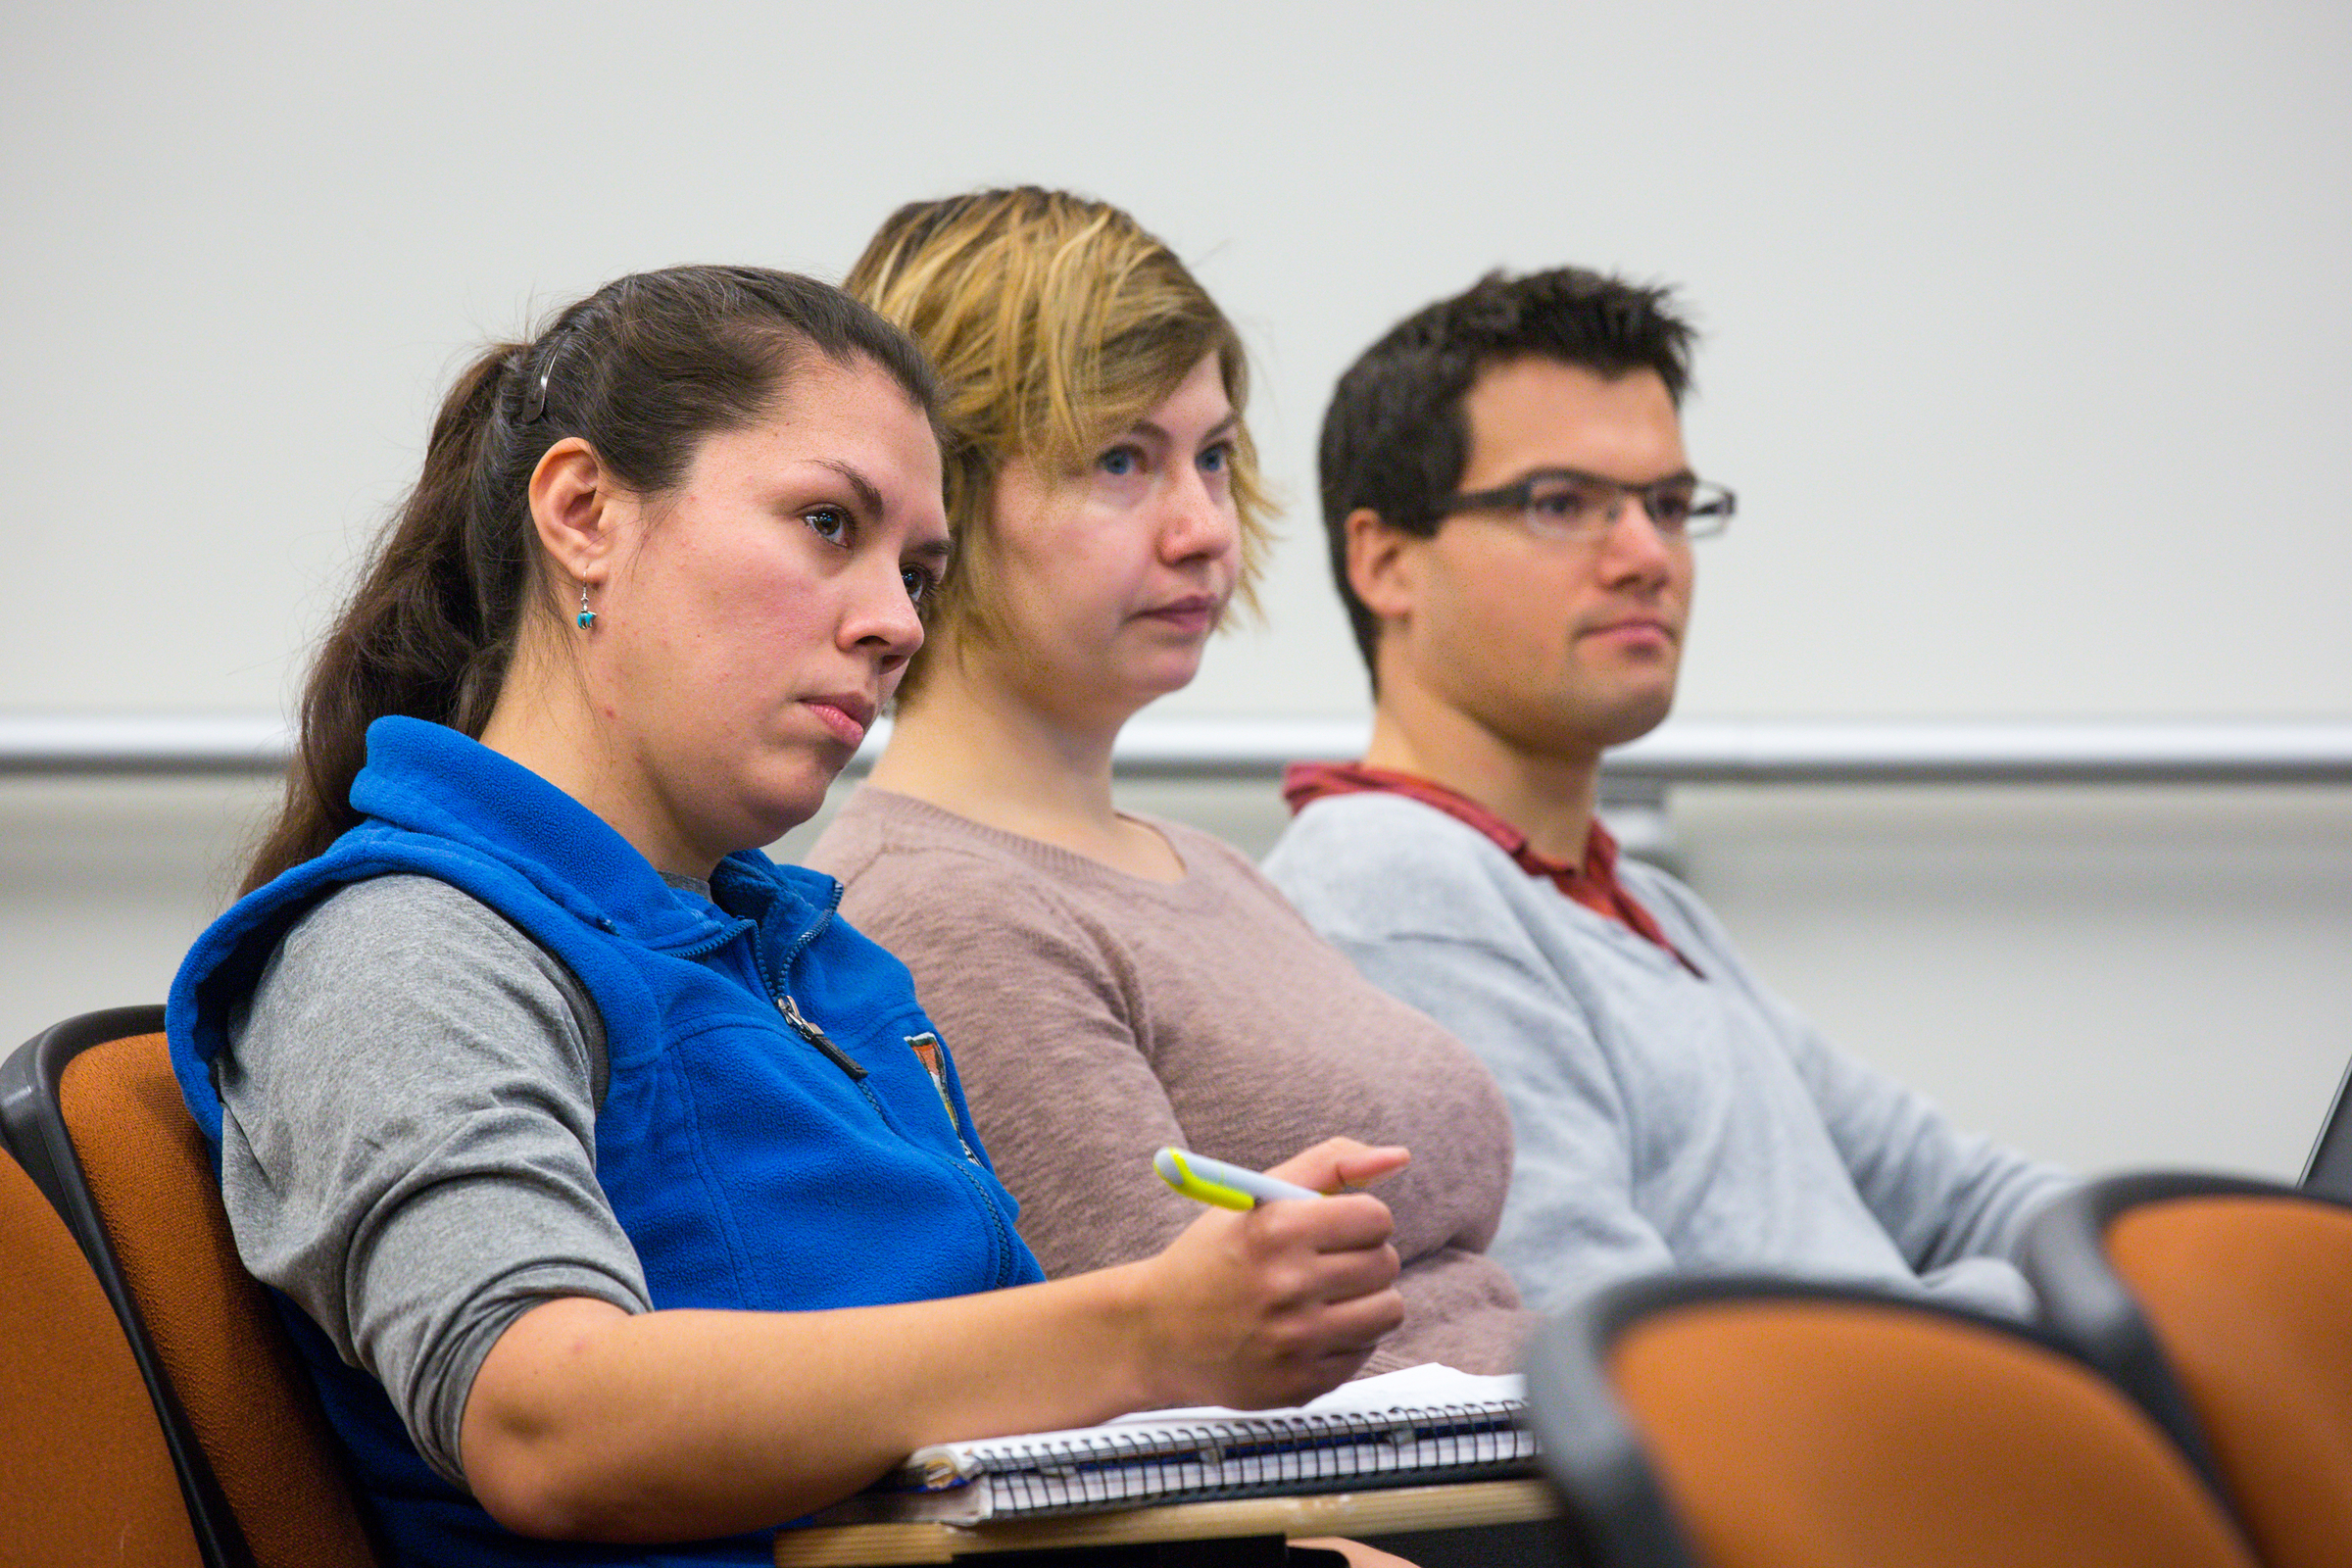 Three students sit in a classroom listening to a presentation.